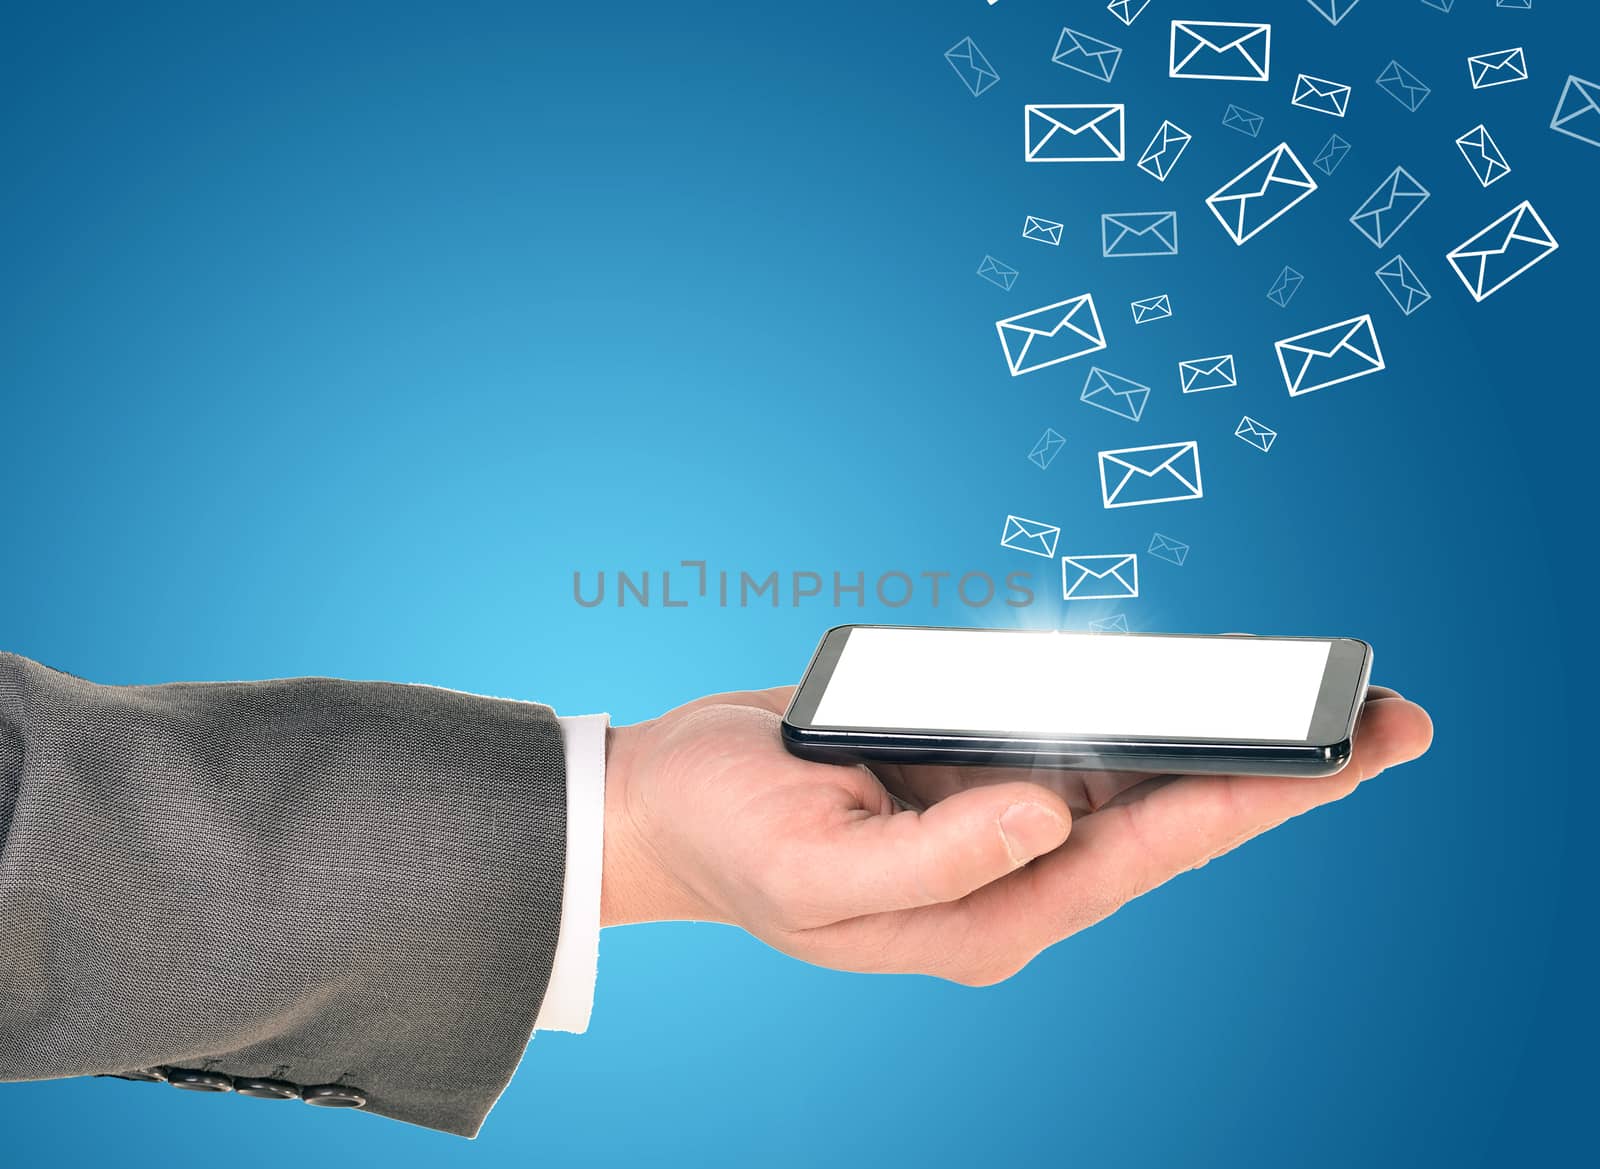 Man hands using smart phone with flying envelopes by cherezoff